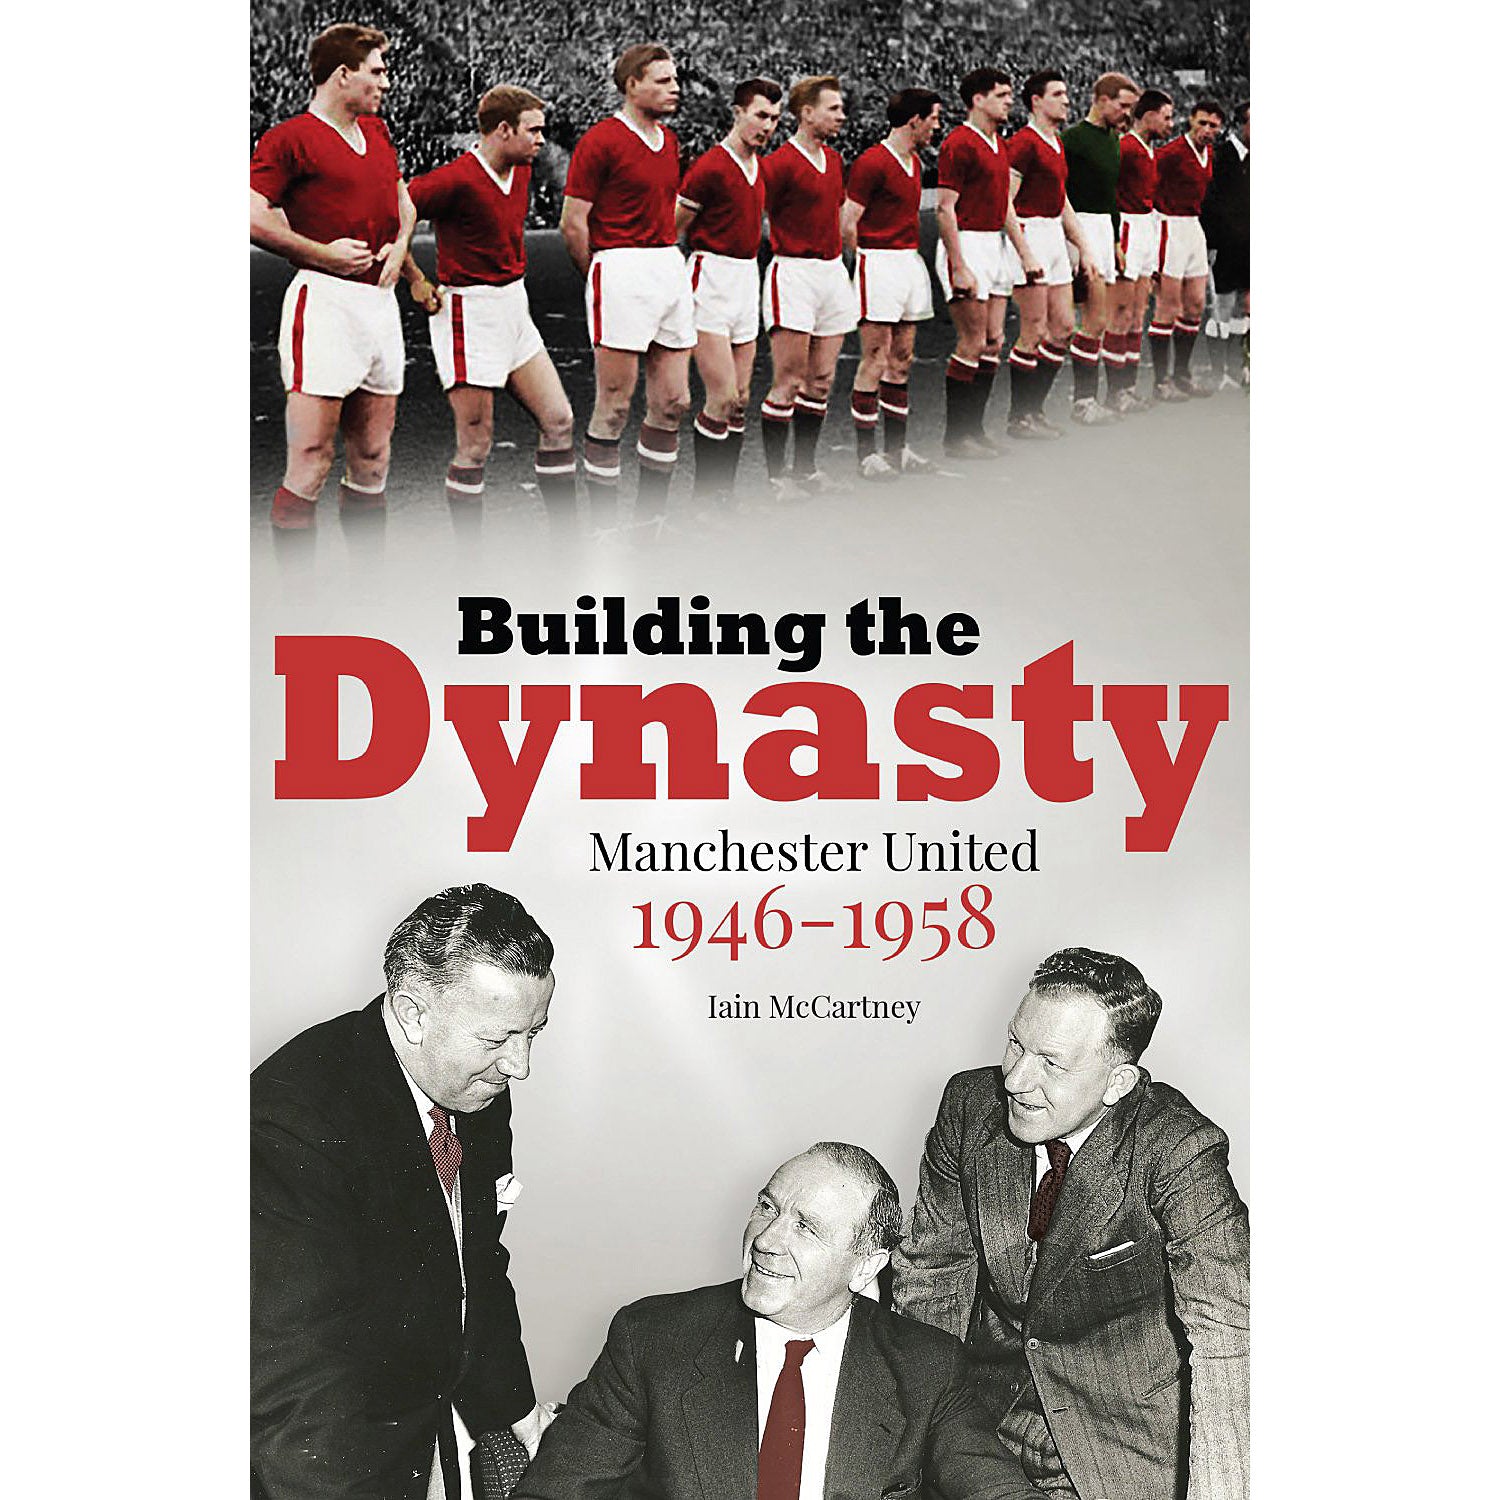 Building the Dynasty – Manchester United 1946-1958